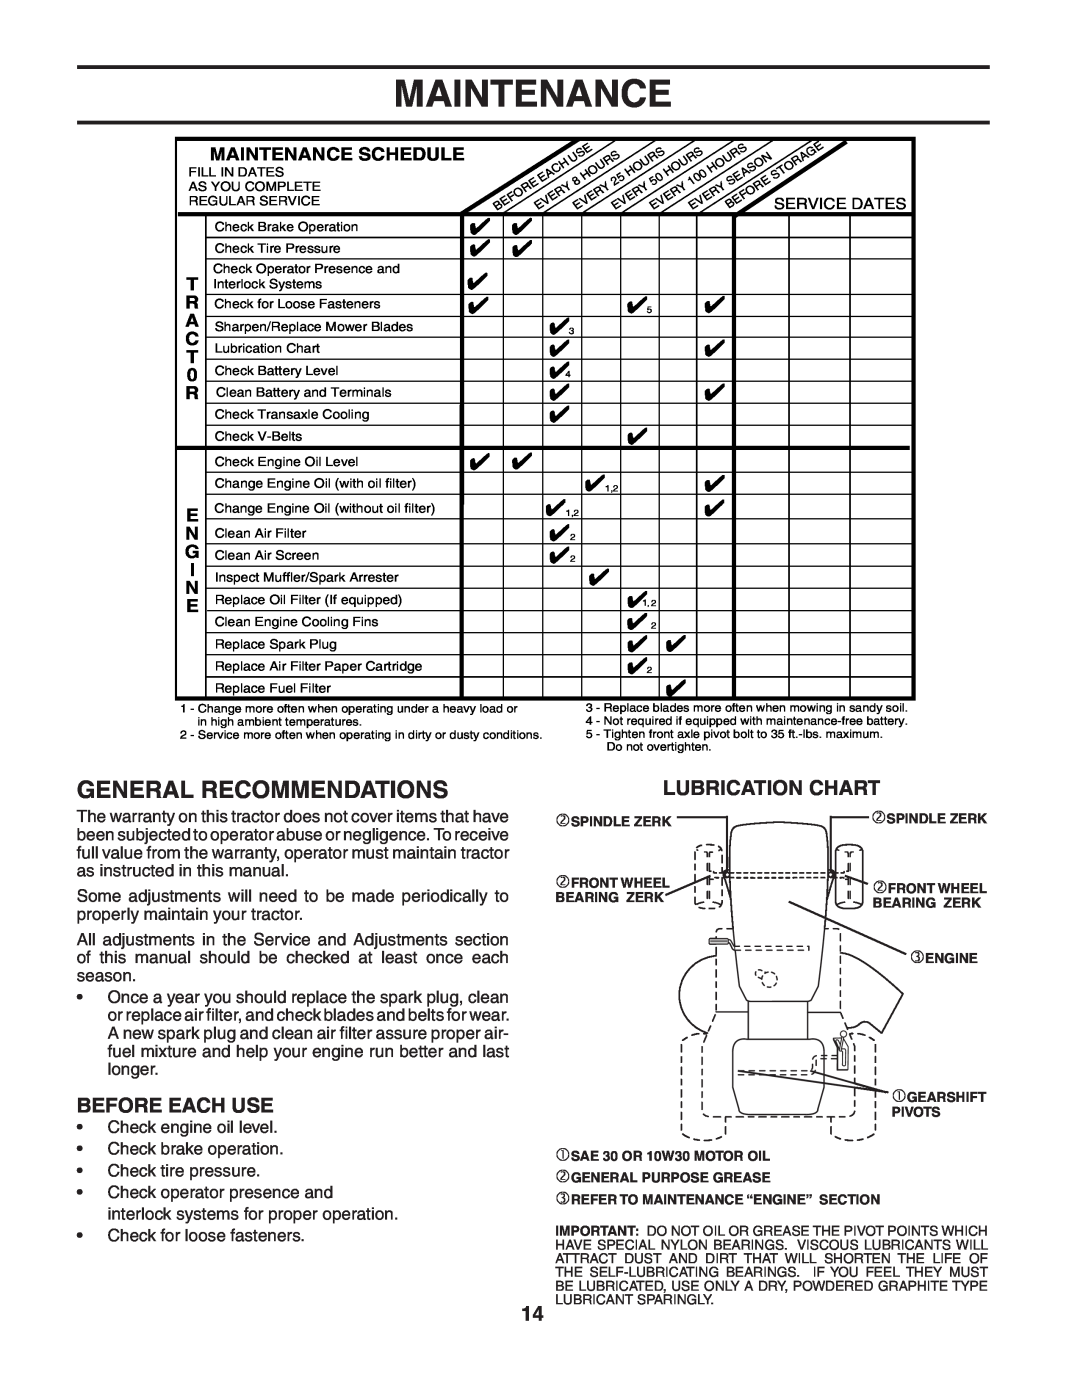 Weed Eater WET2242STA manual Maintenance, General Recommendations, Before Each Use, Lubrication Chart 